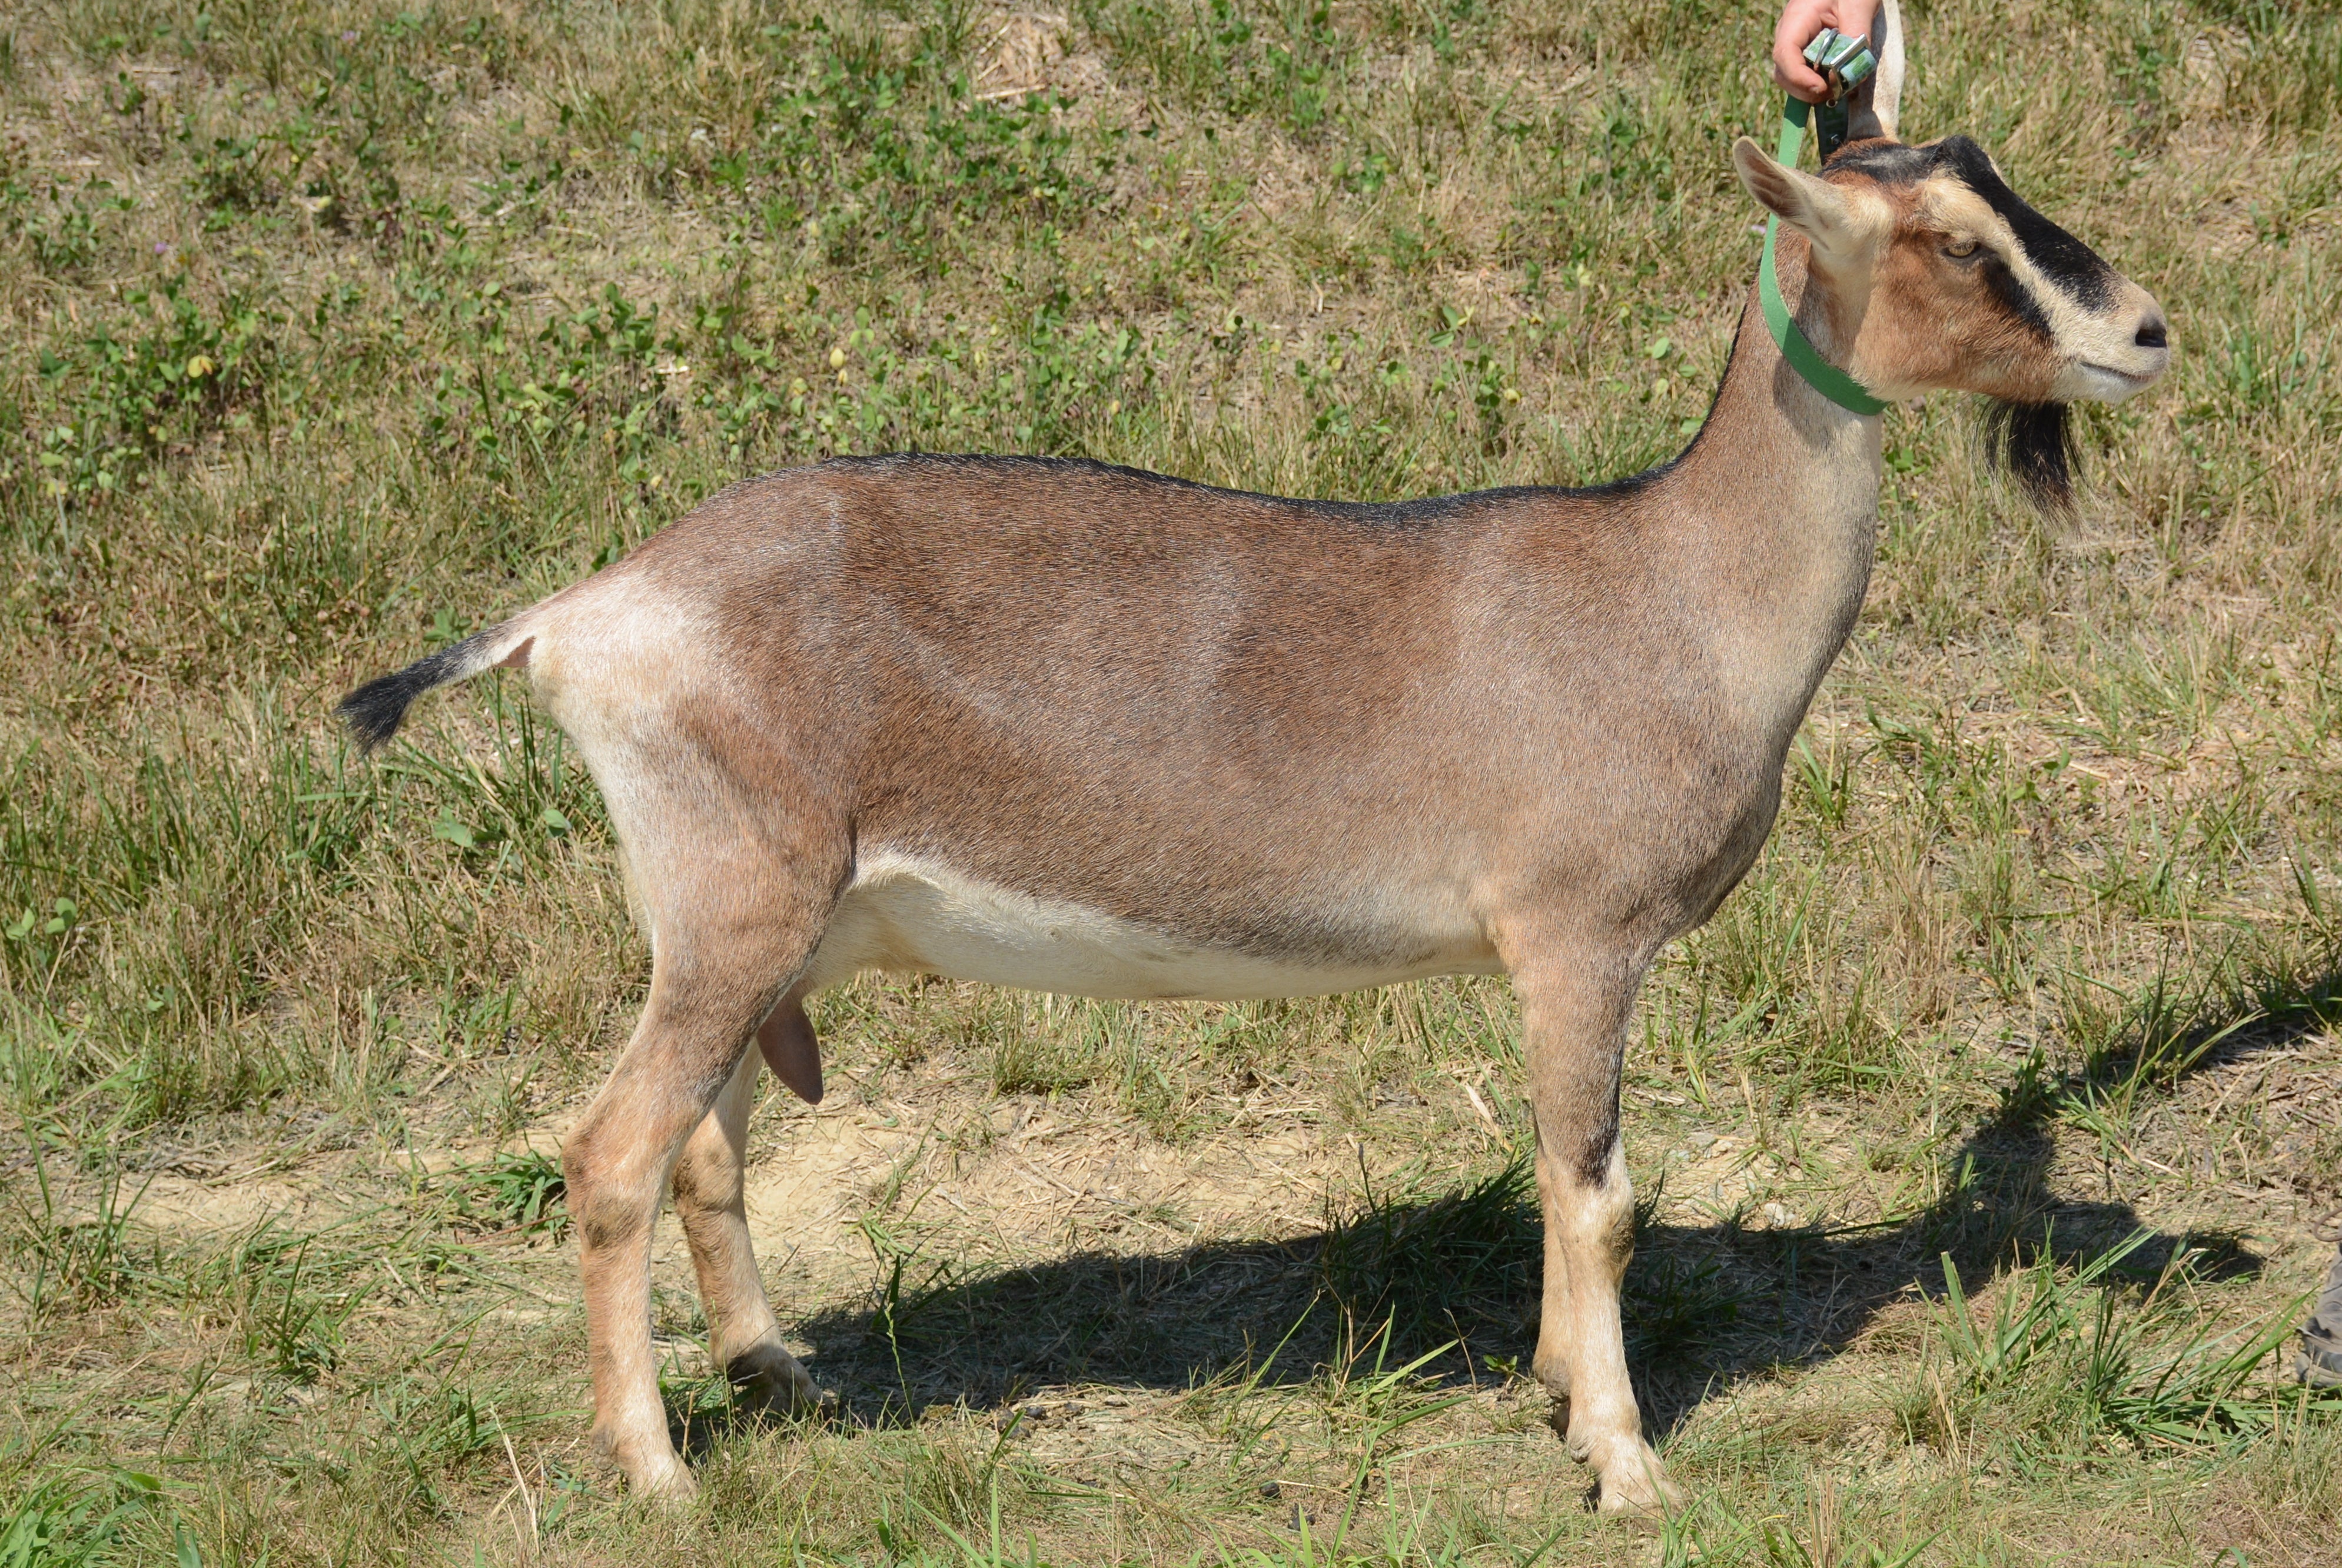 Teal - Alpine Dairy Goat in Southern Indiana